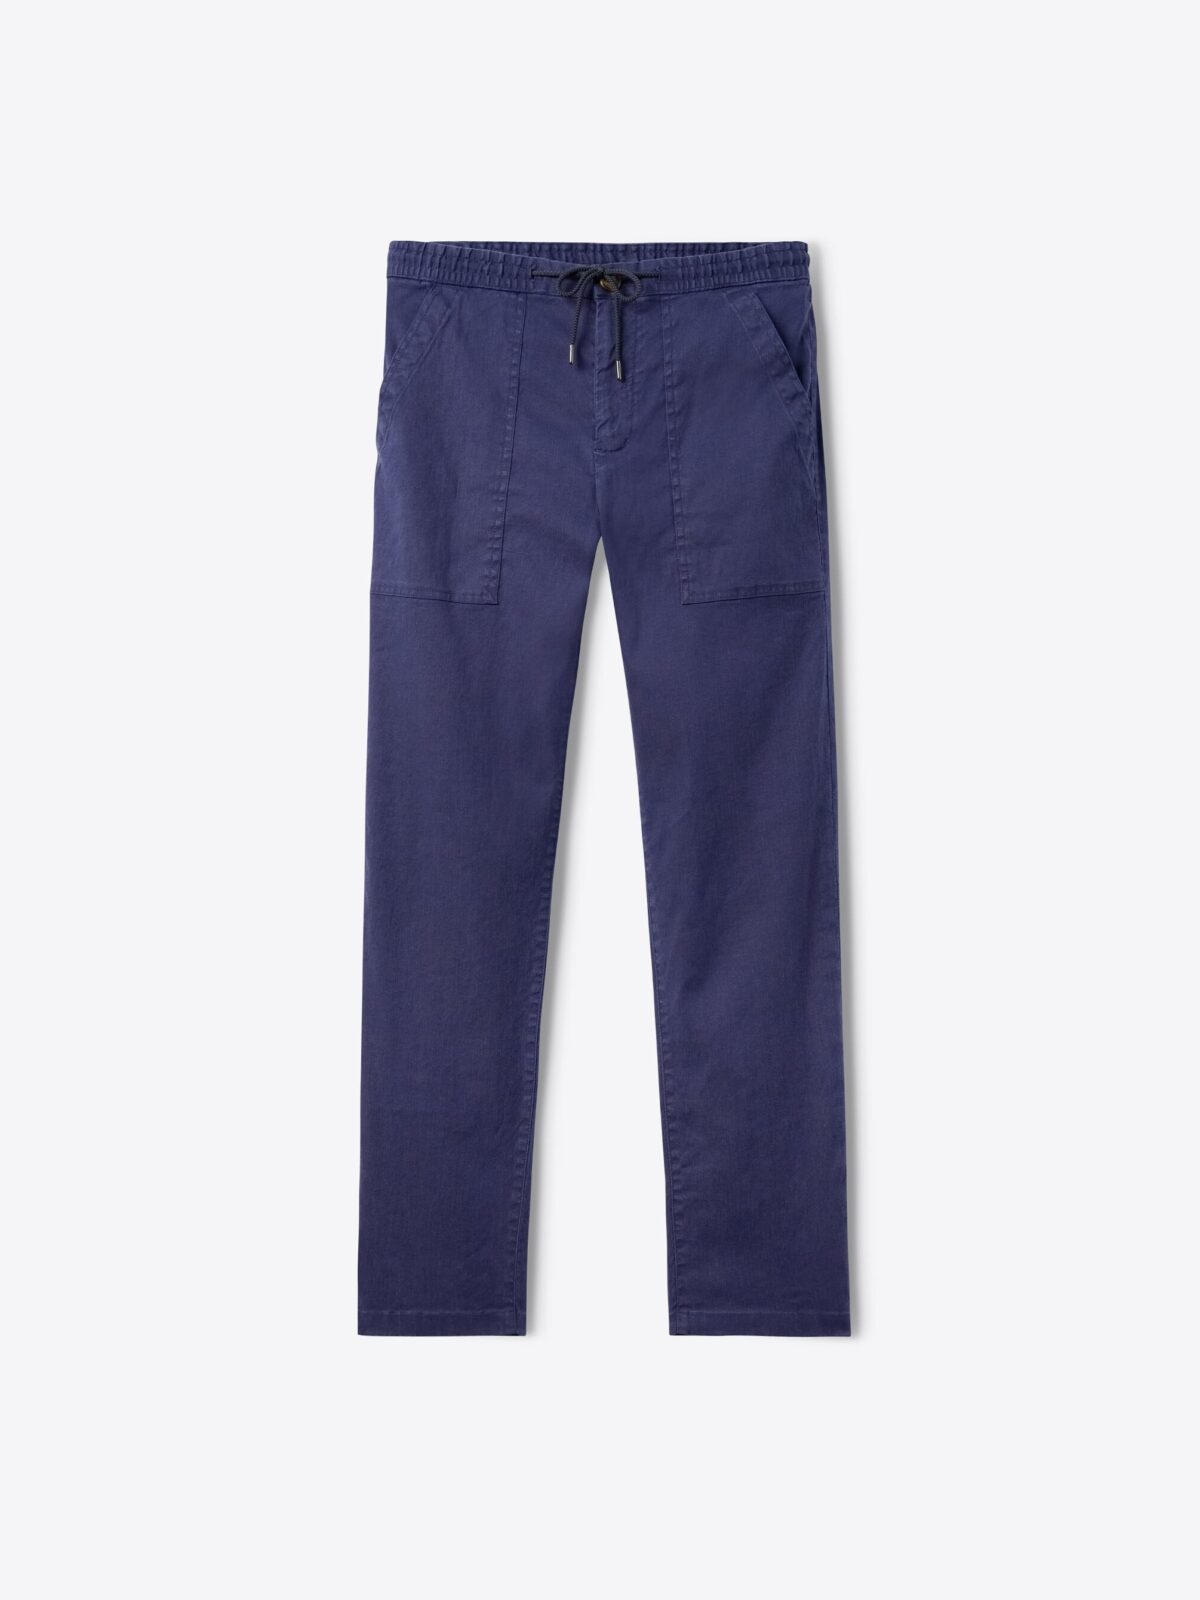 Amalfi Faded Navy Cotton and Linen Stretch Drawstring Pant